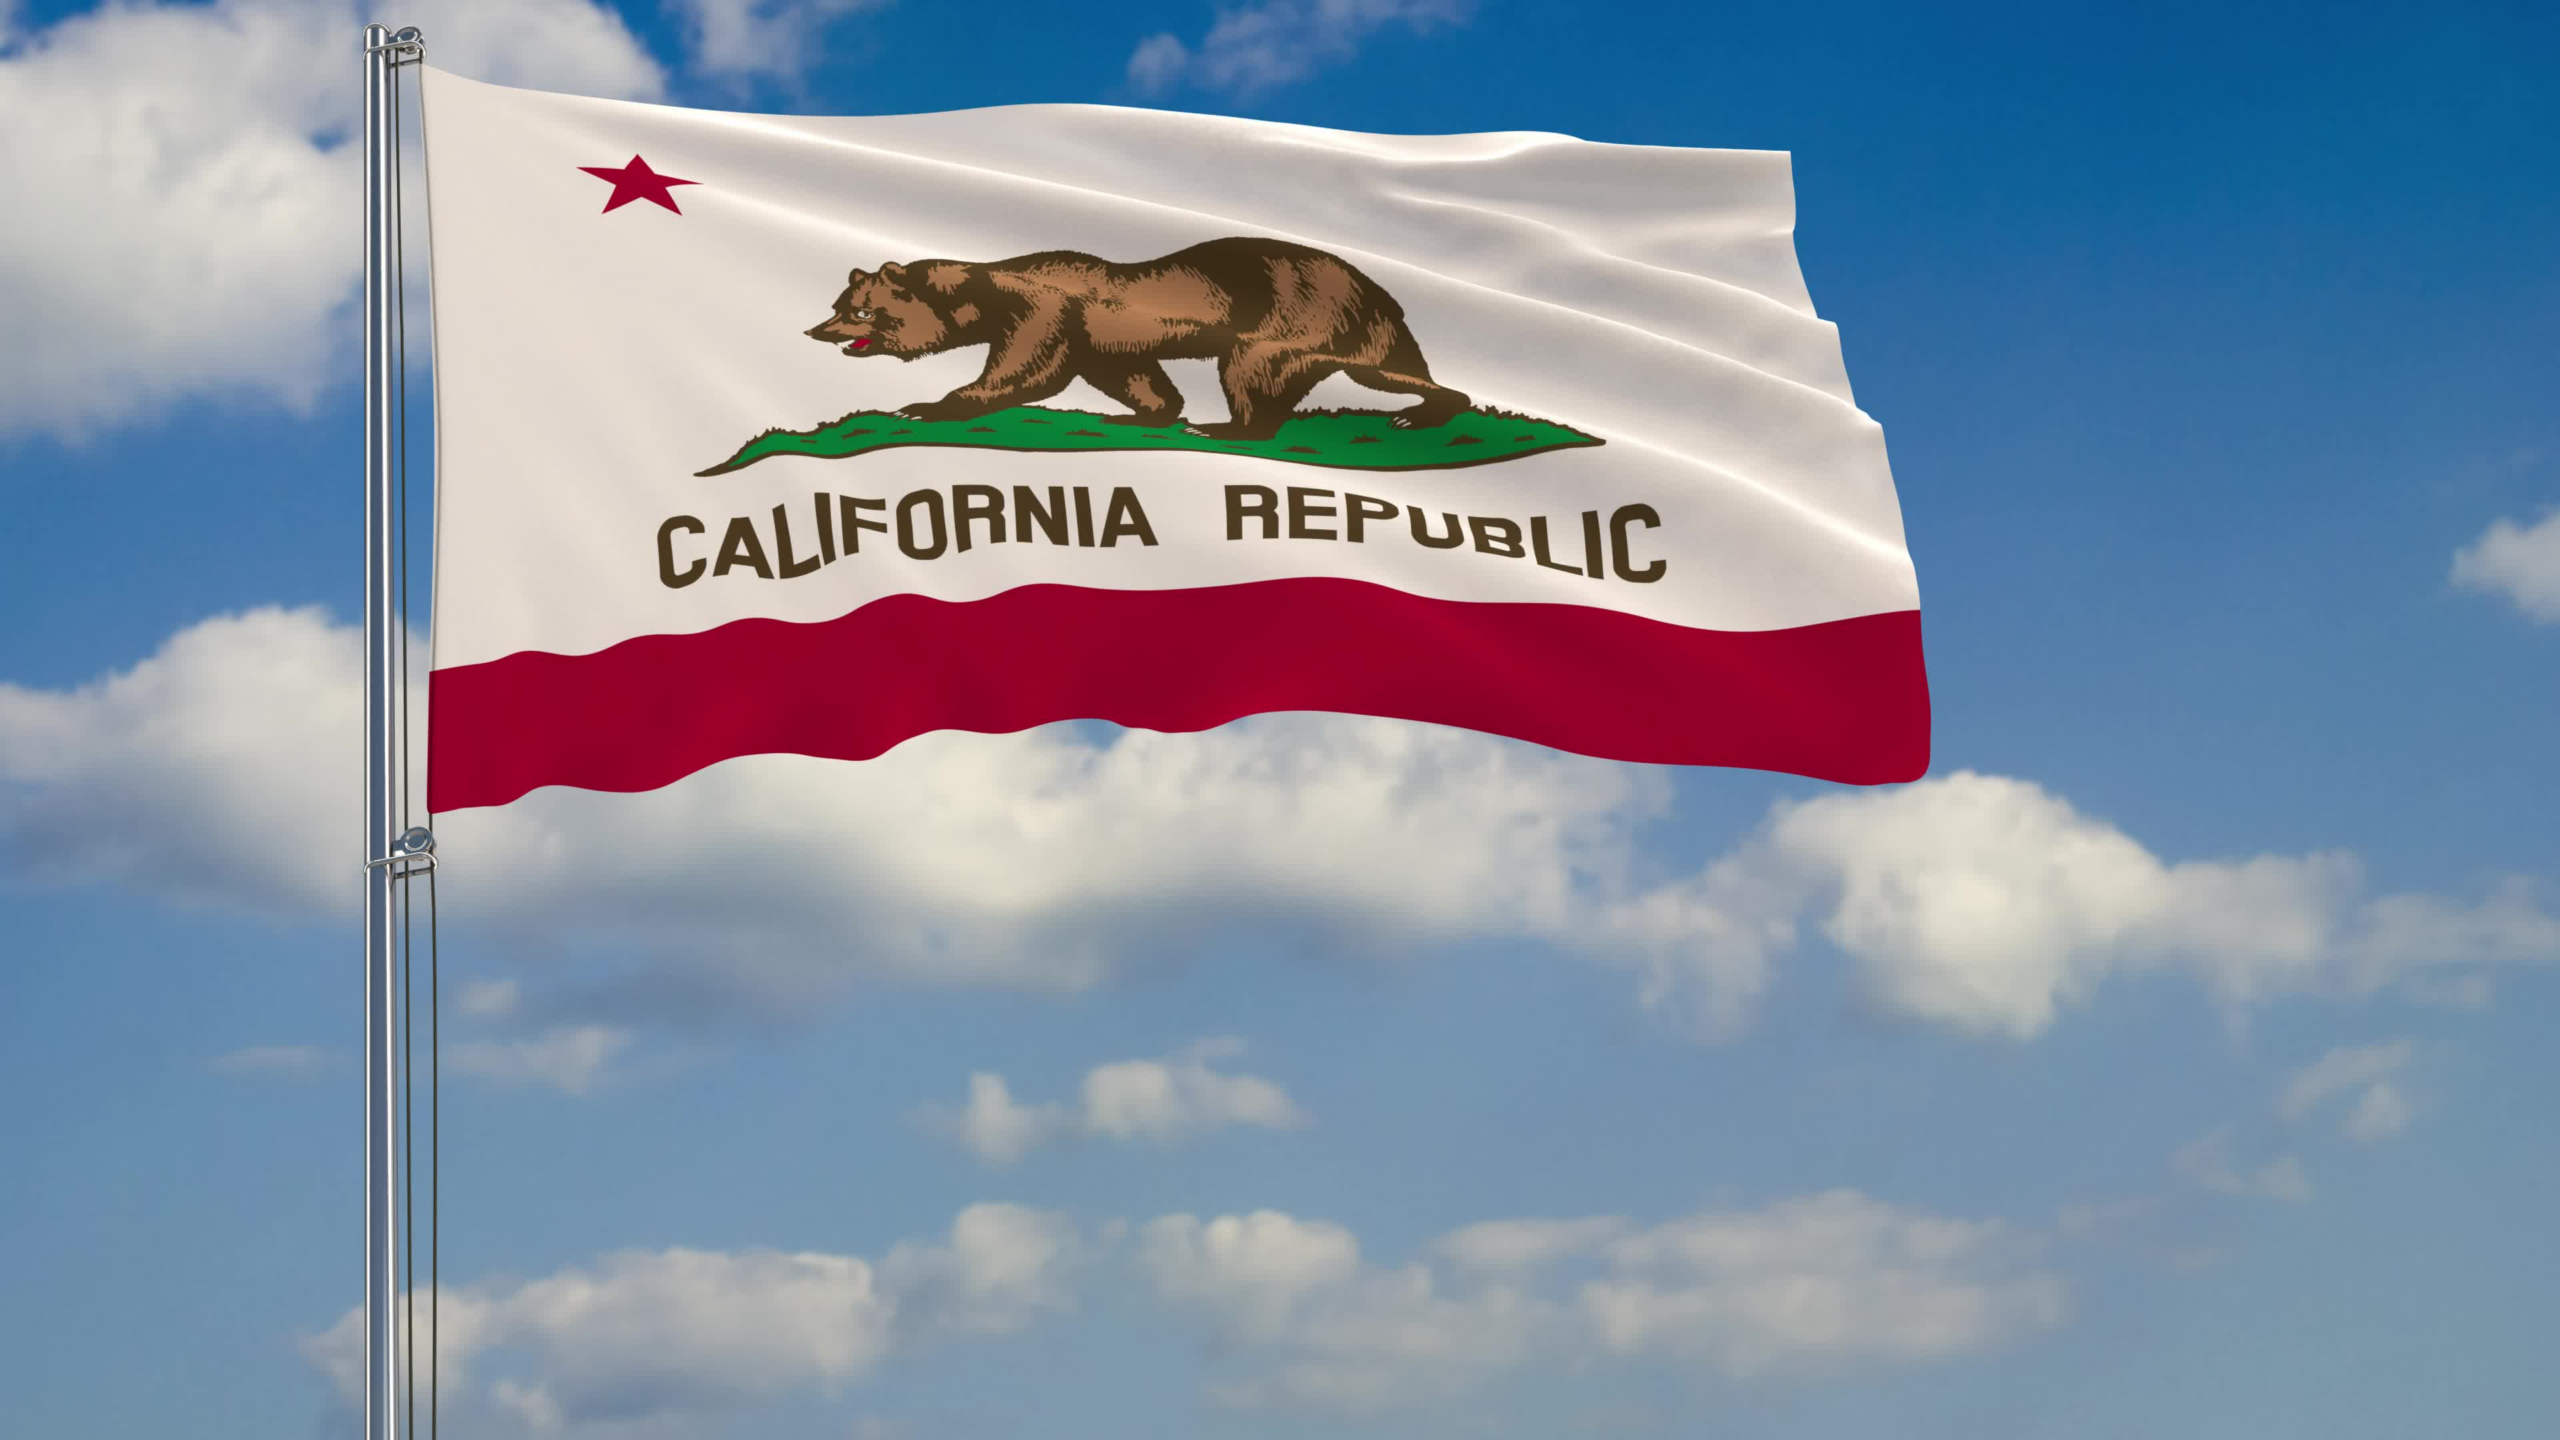 Flag of California - US state fluttering in the wind against a cloudy sky.